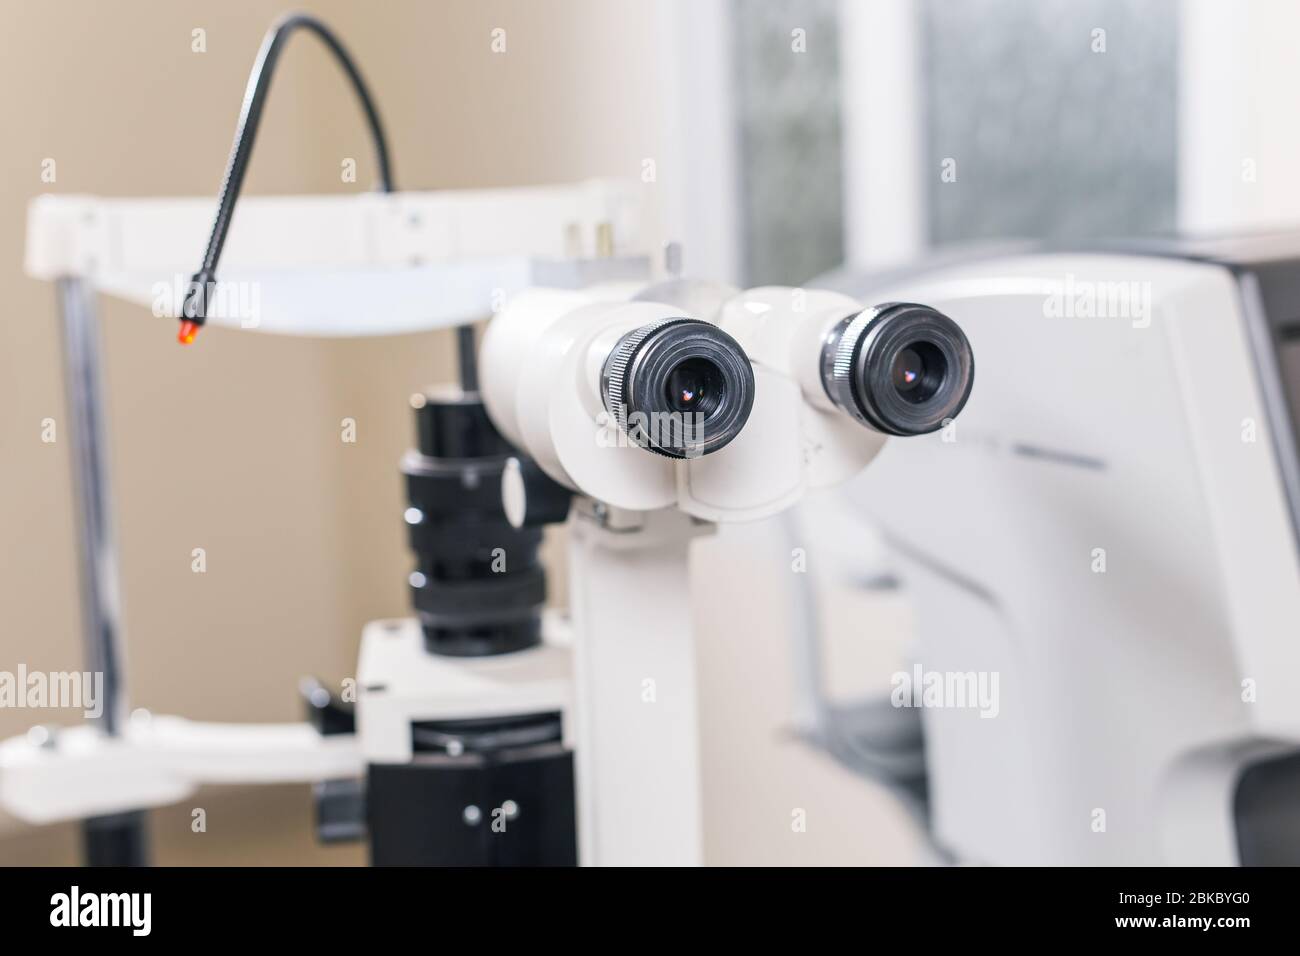 Eye health, eye disease prevention. Medical laboratory. Medicine and health care, Ophthalmology services and equipment. Stock Photo